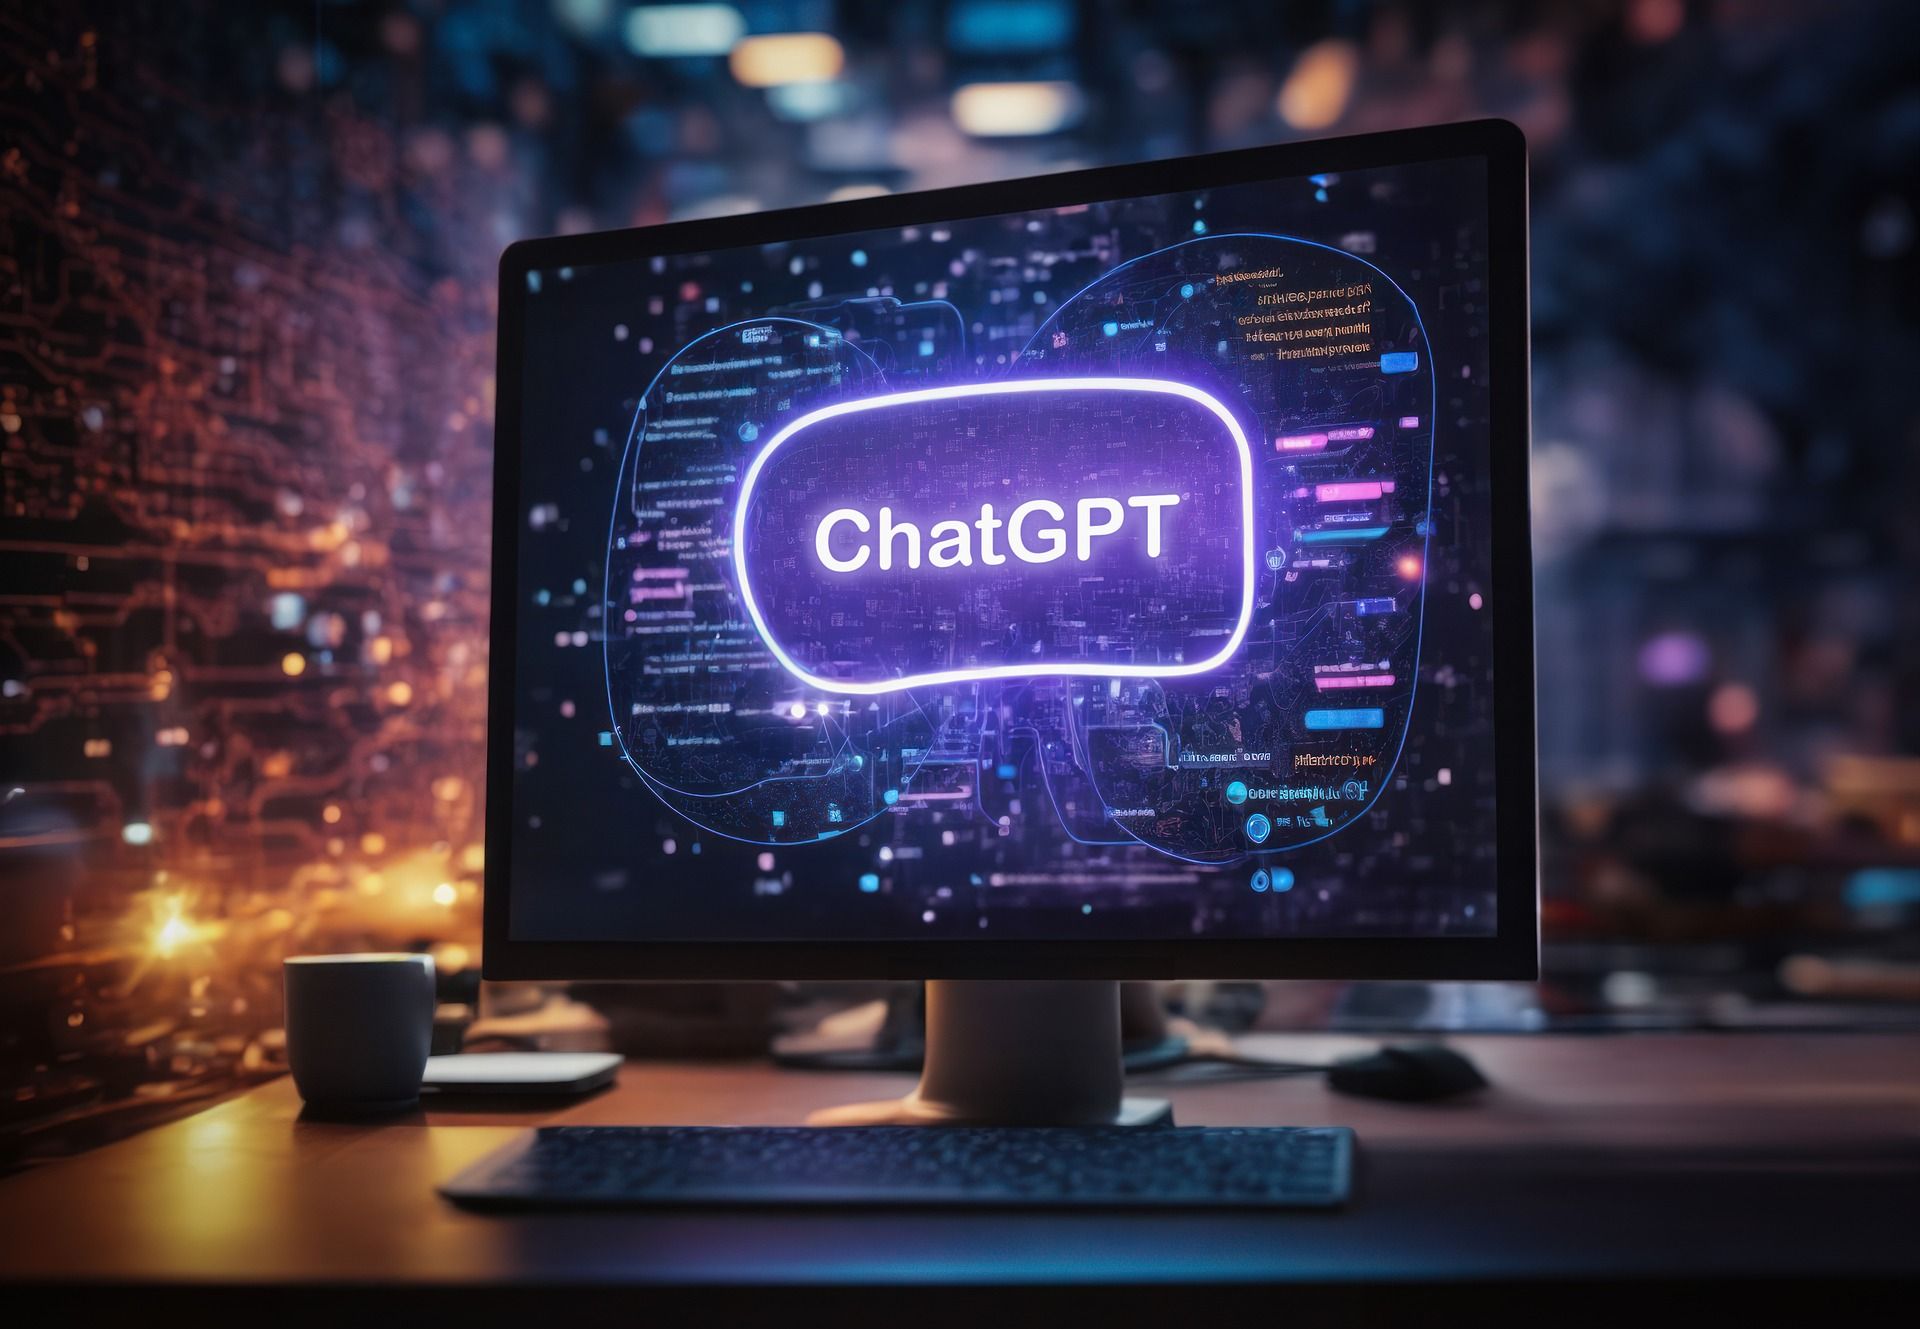 ChatGPT's Archive Chats: A step-by-step guide to the feature